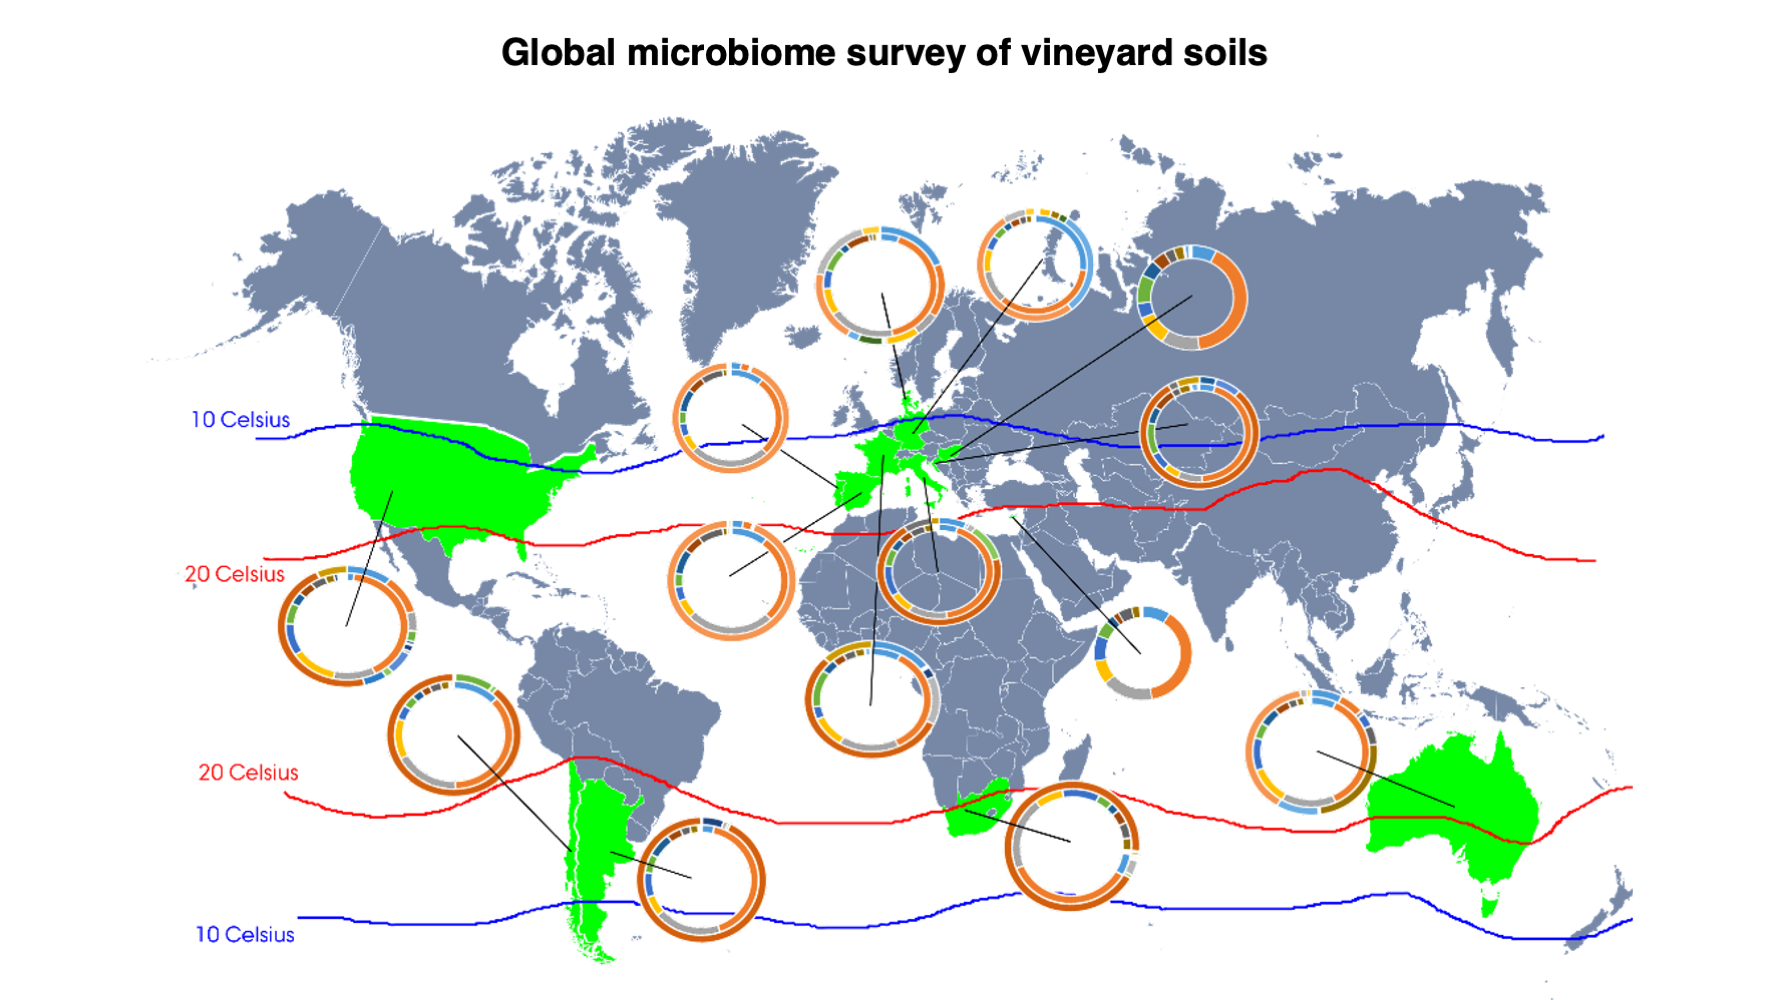 A global analysis of vineyard soil microbial diversity provides insights into the biogeographical patterns that characterize wine regions worldwide, capturing the microbial dimension of viticultural terroirs